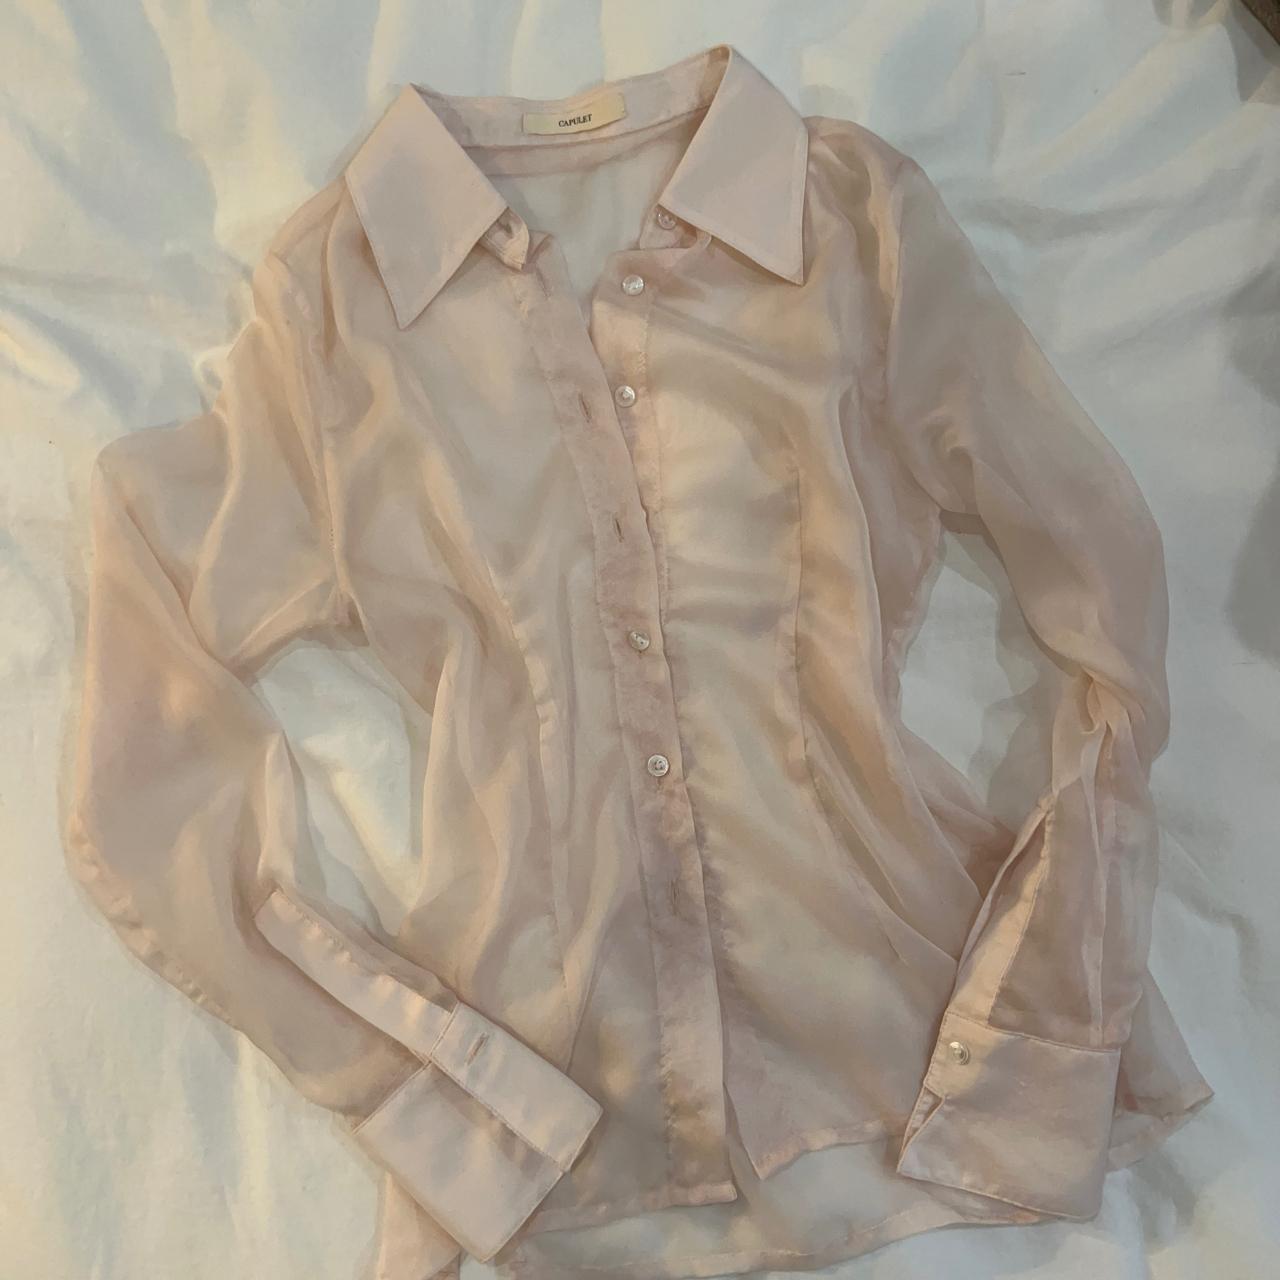 Capulet Women's Cream and Pink Blouse (4)